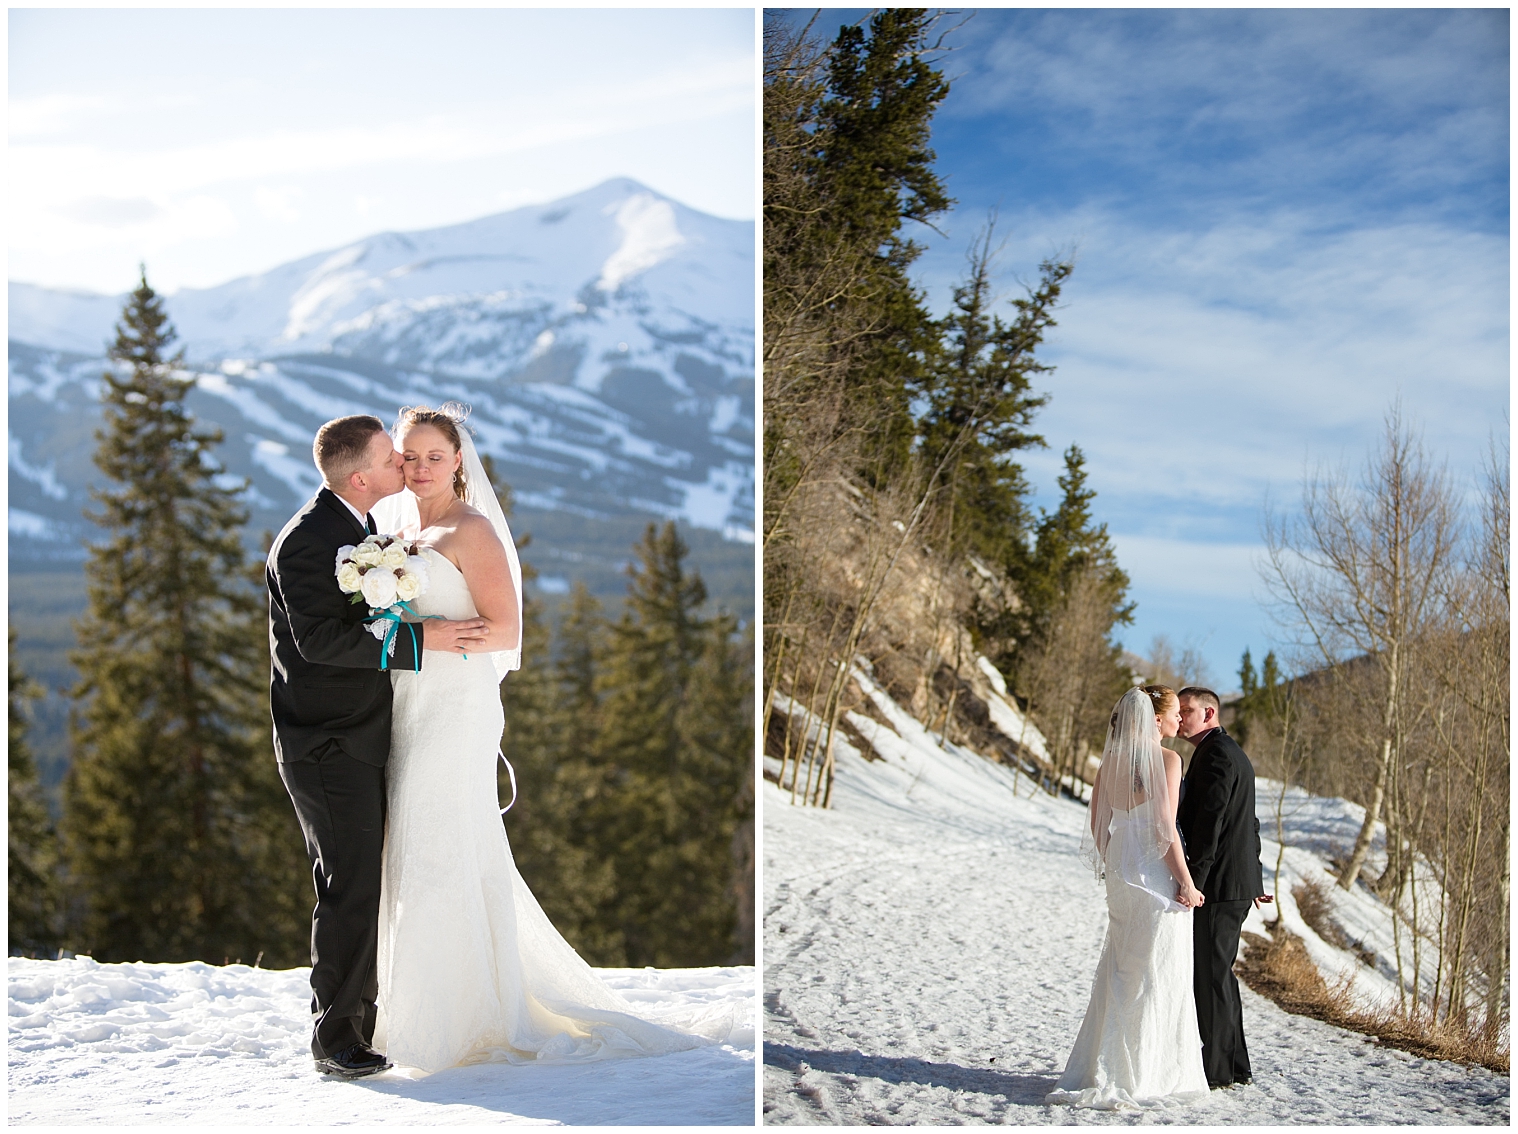 The wedding couple kiss each other during portraits at their Breckenridge elopement.